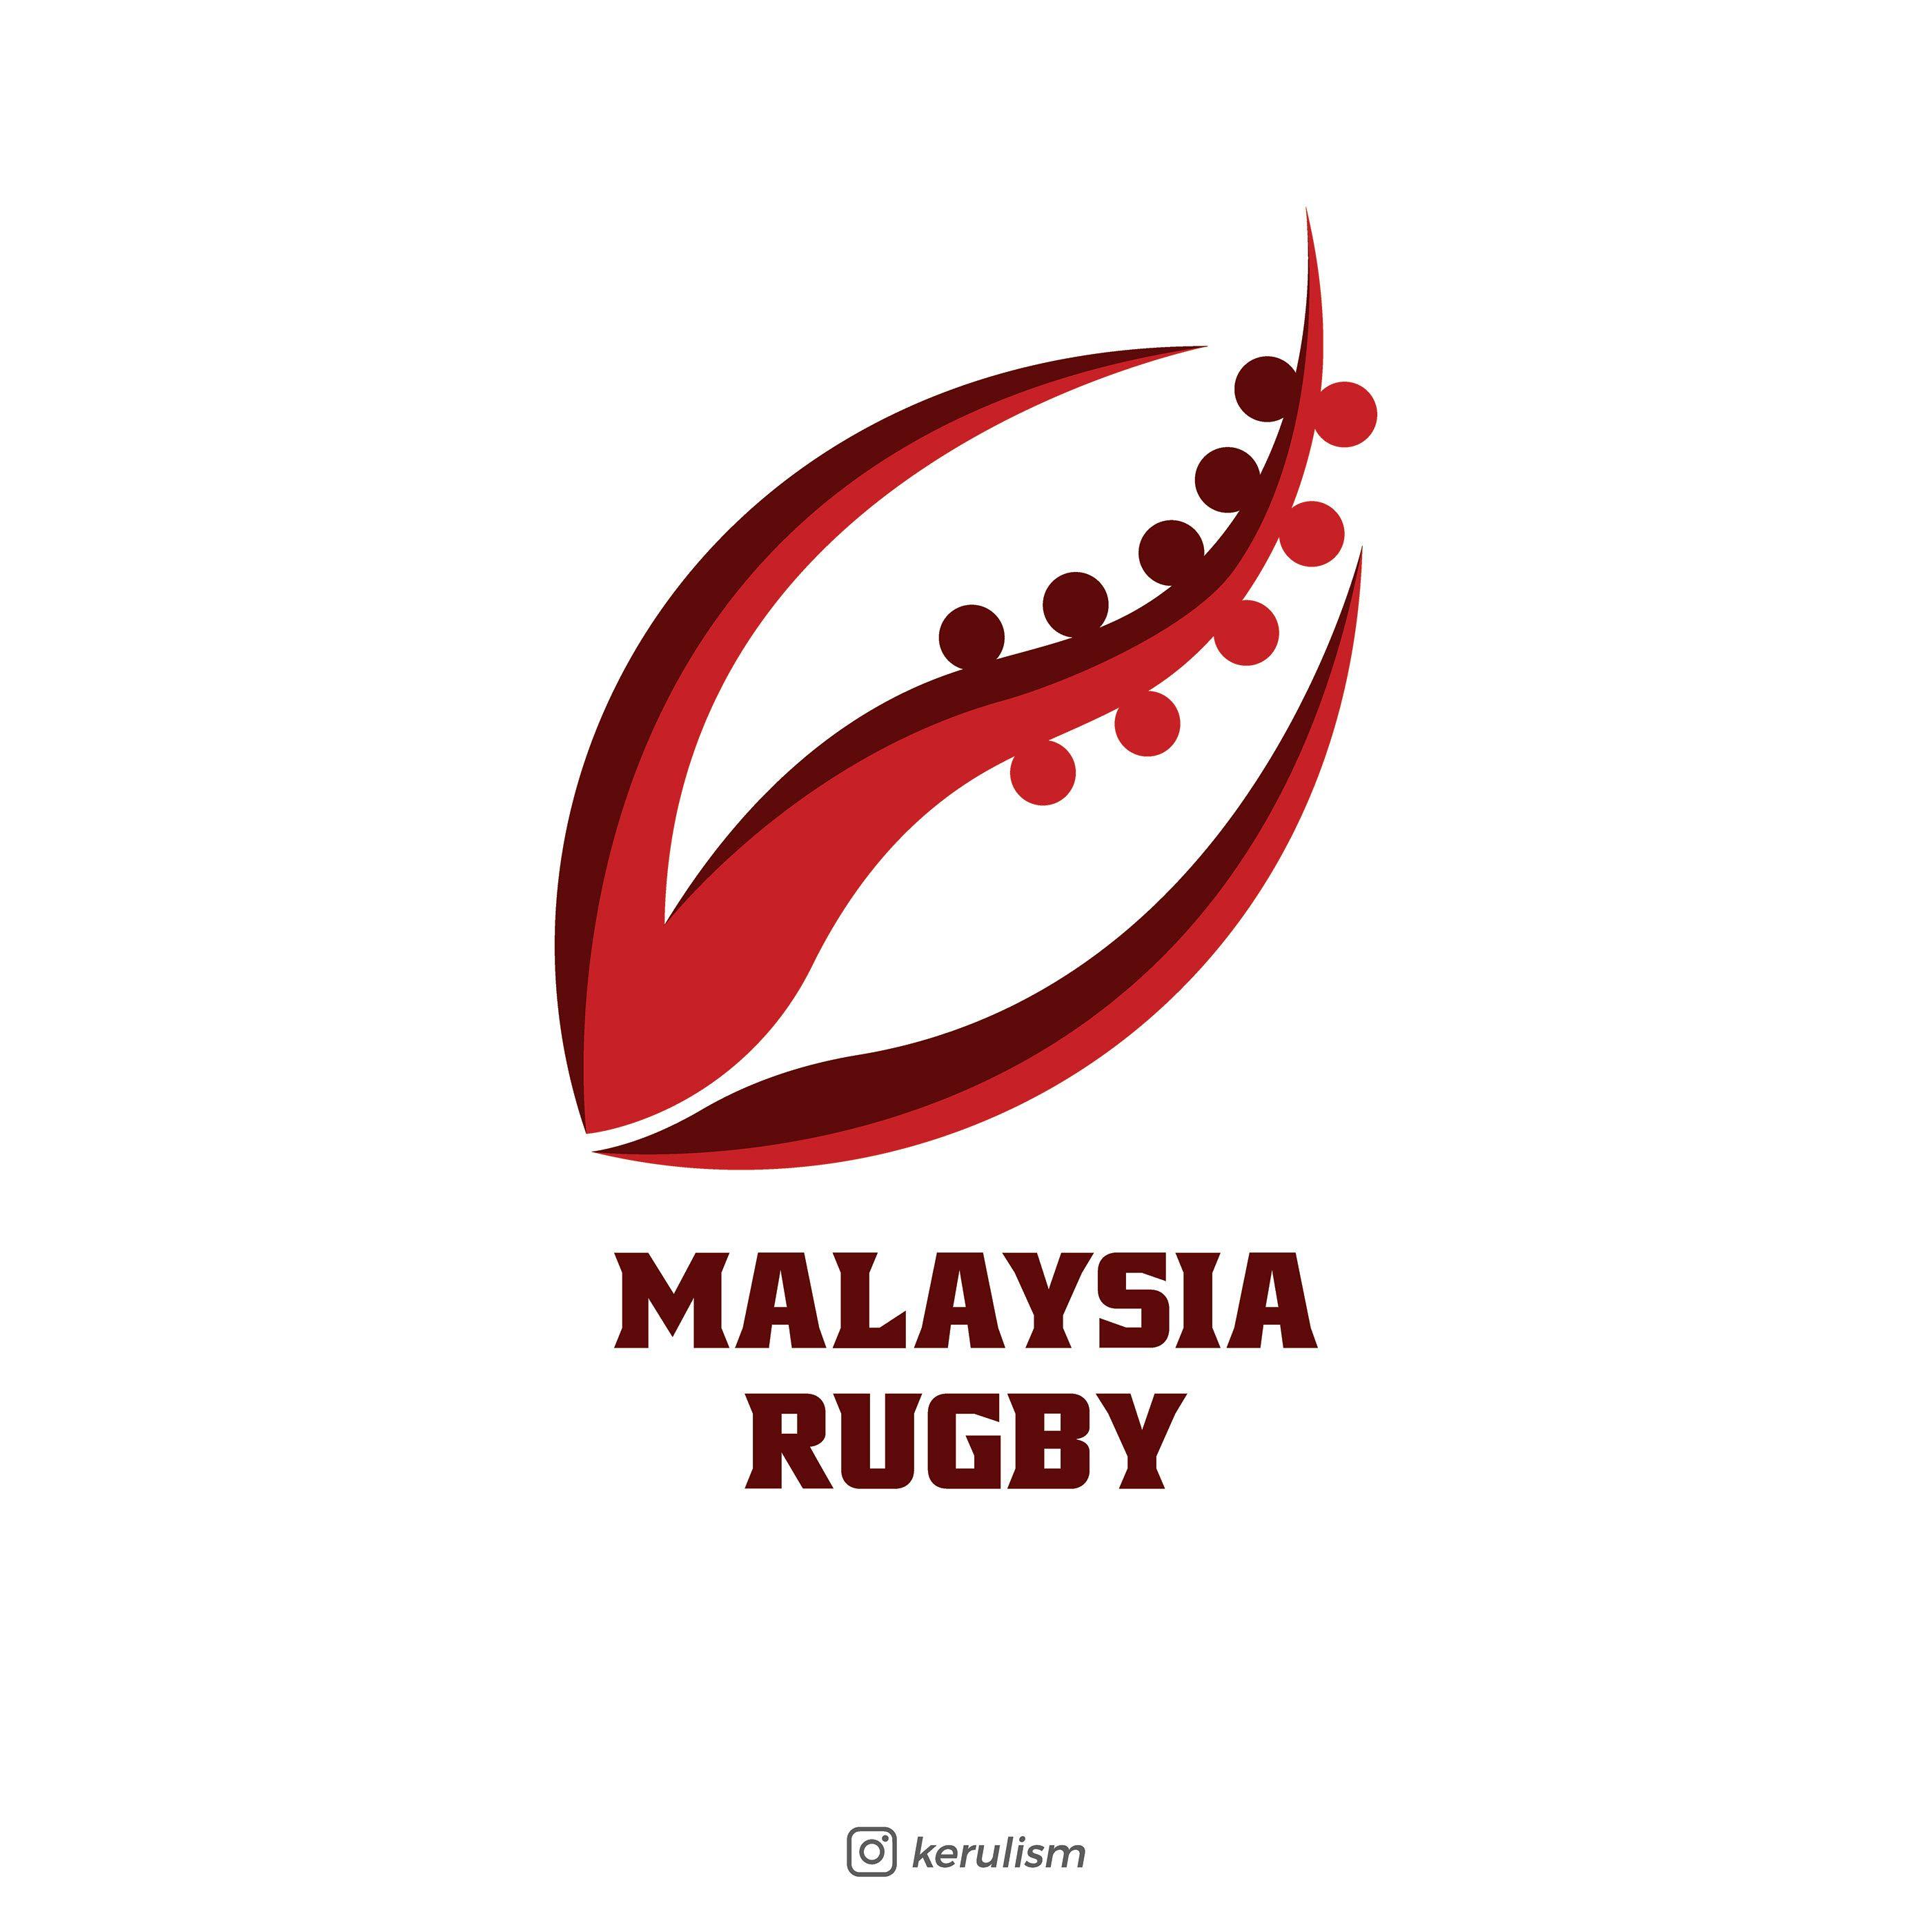 Rugby Logo - Malaysia Rugby Logo Revamped on Behance